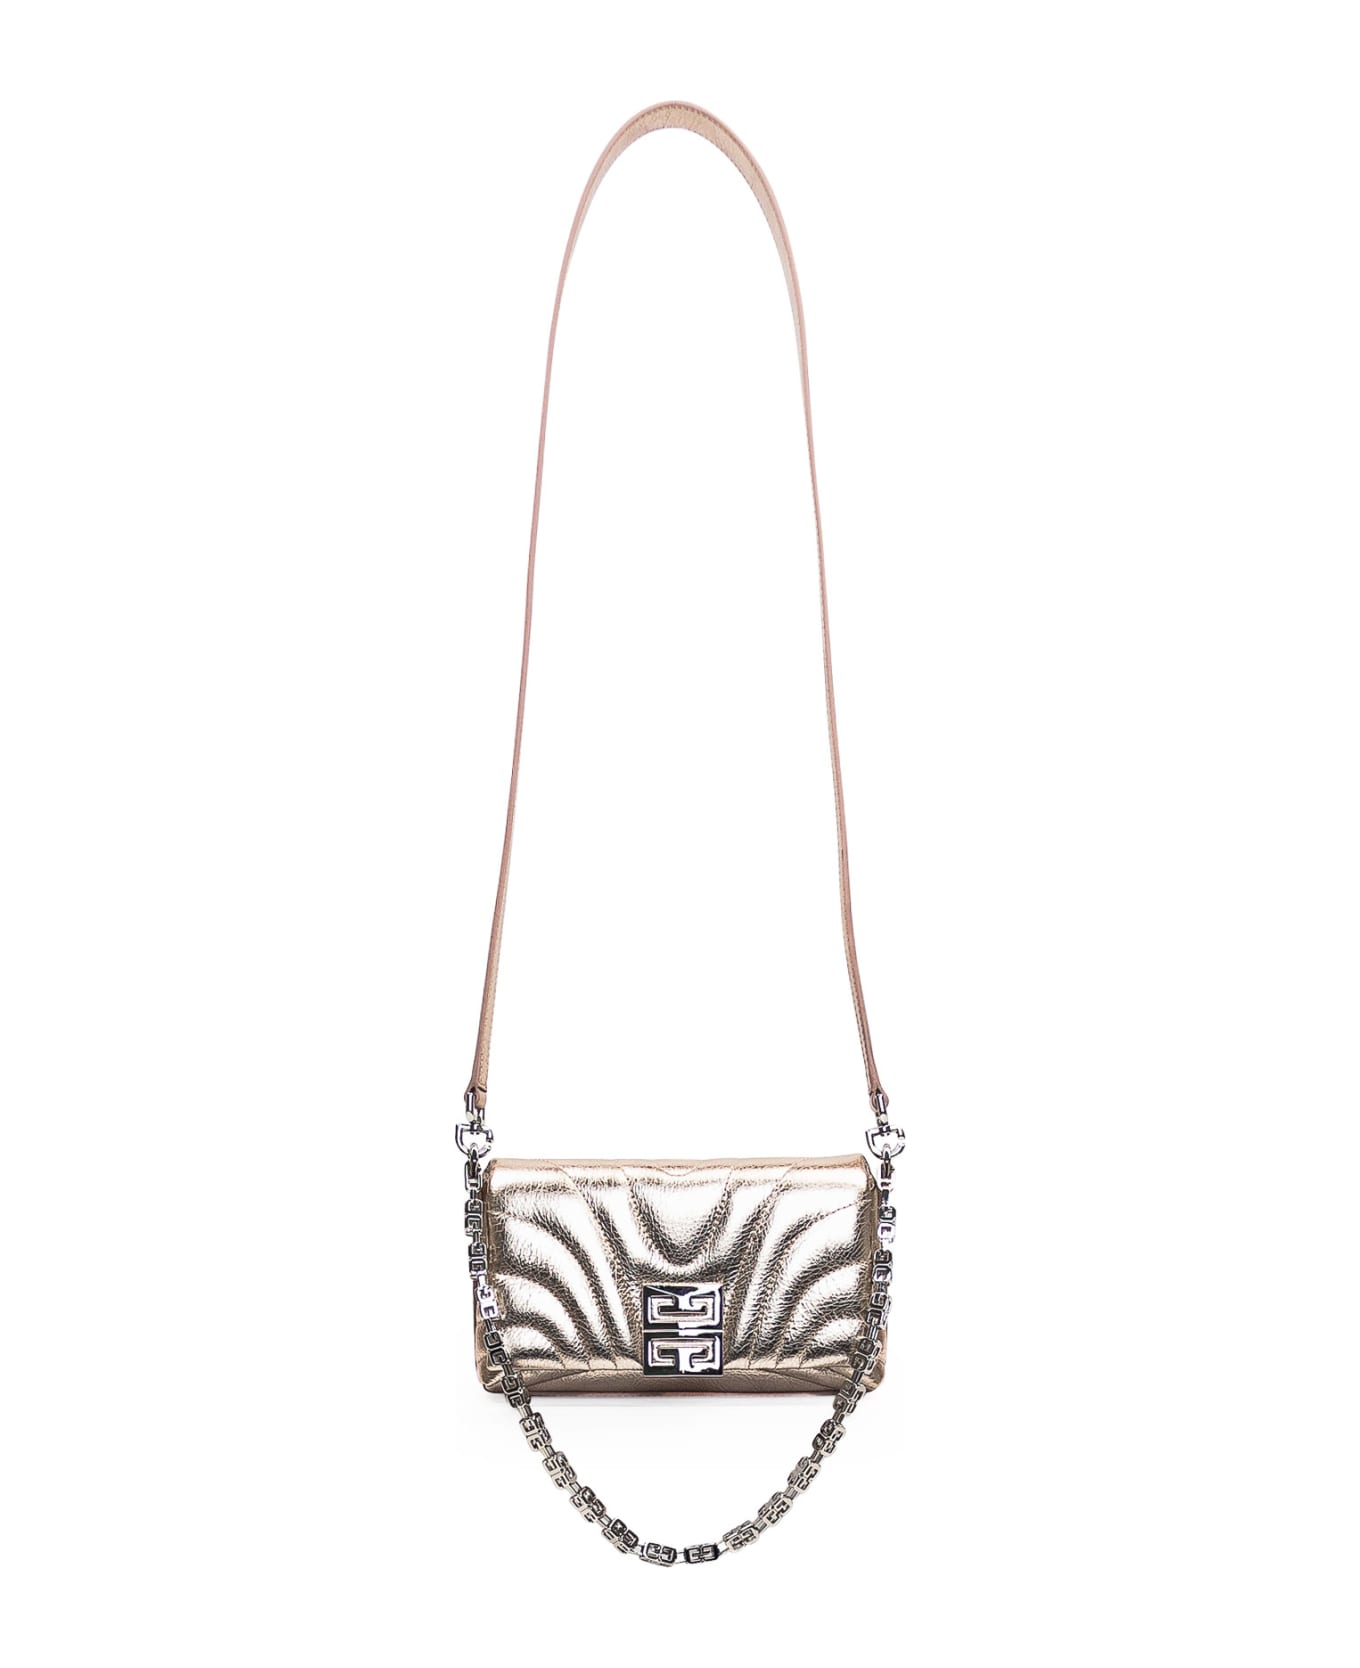 Givenchy 4g Soft Micro Bag - DUSTY GOLD